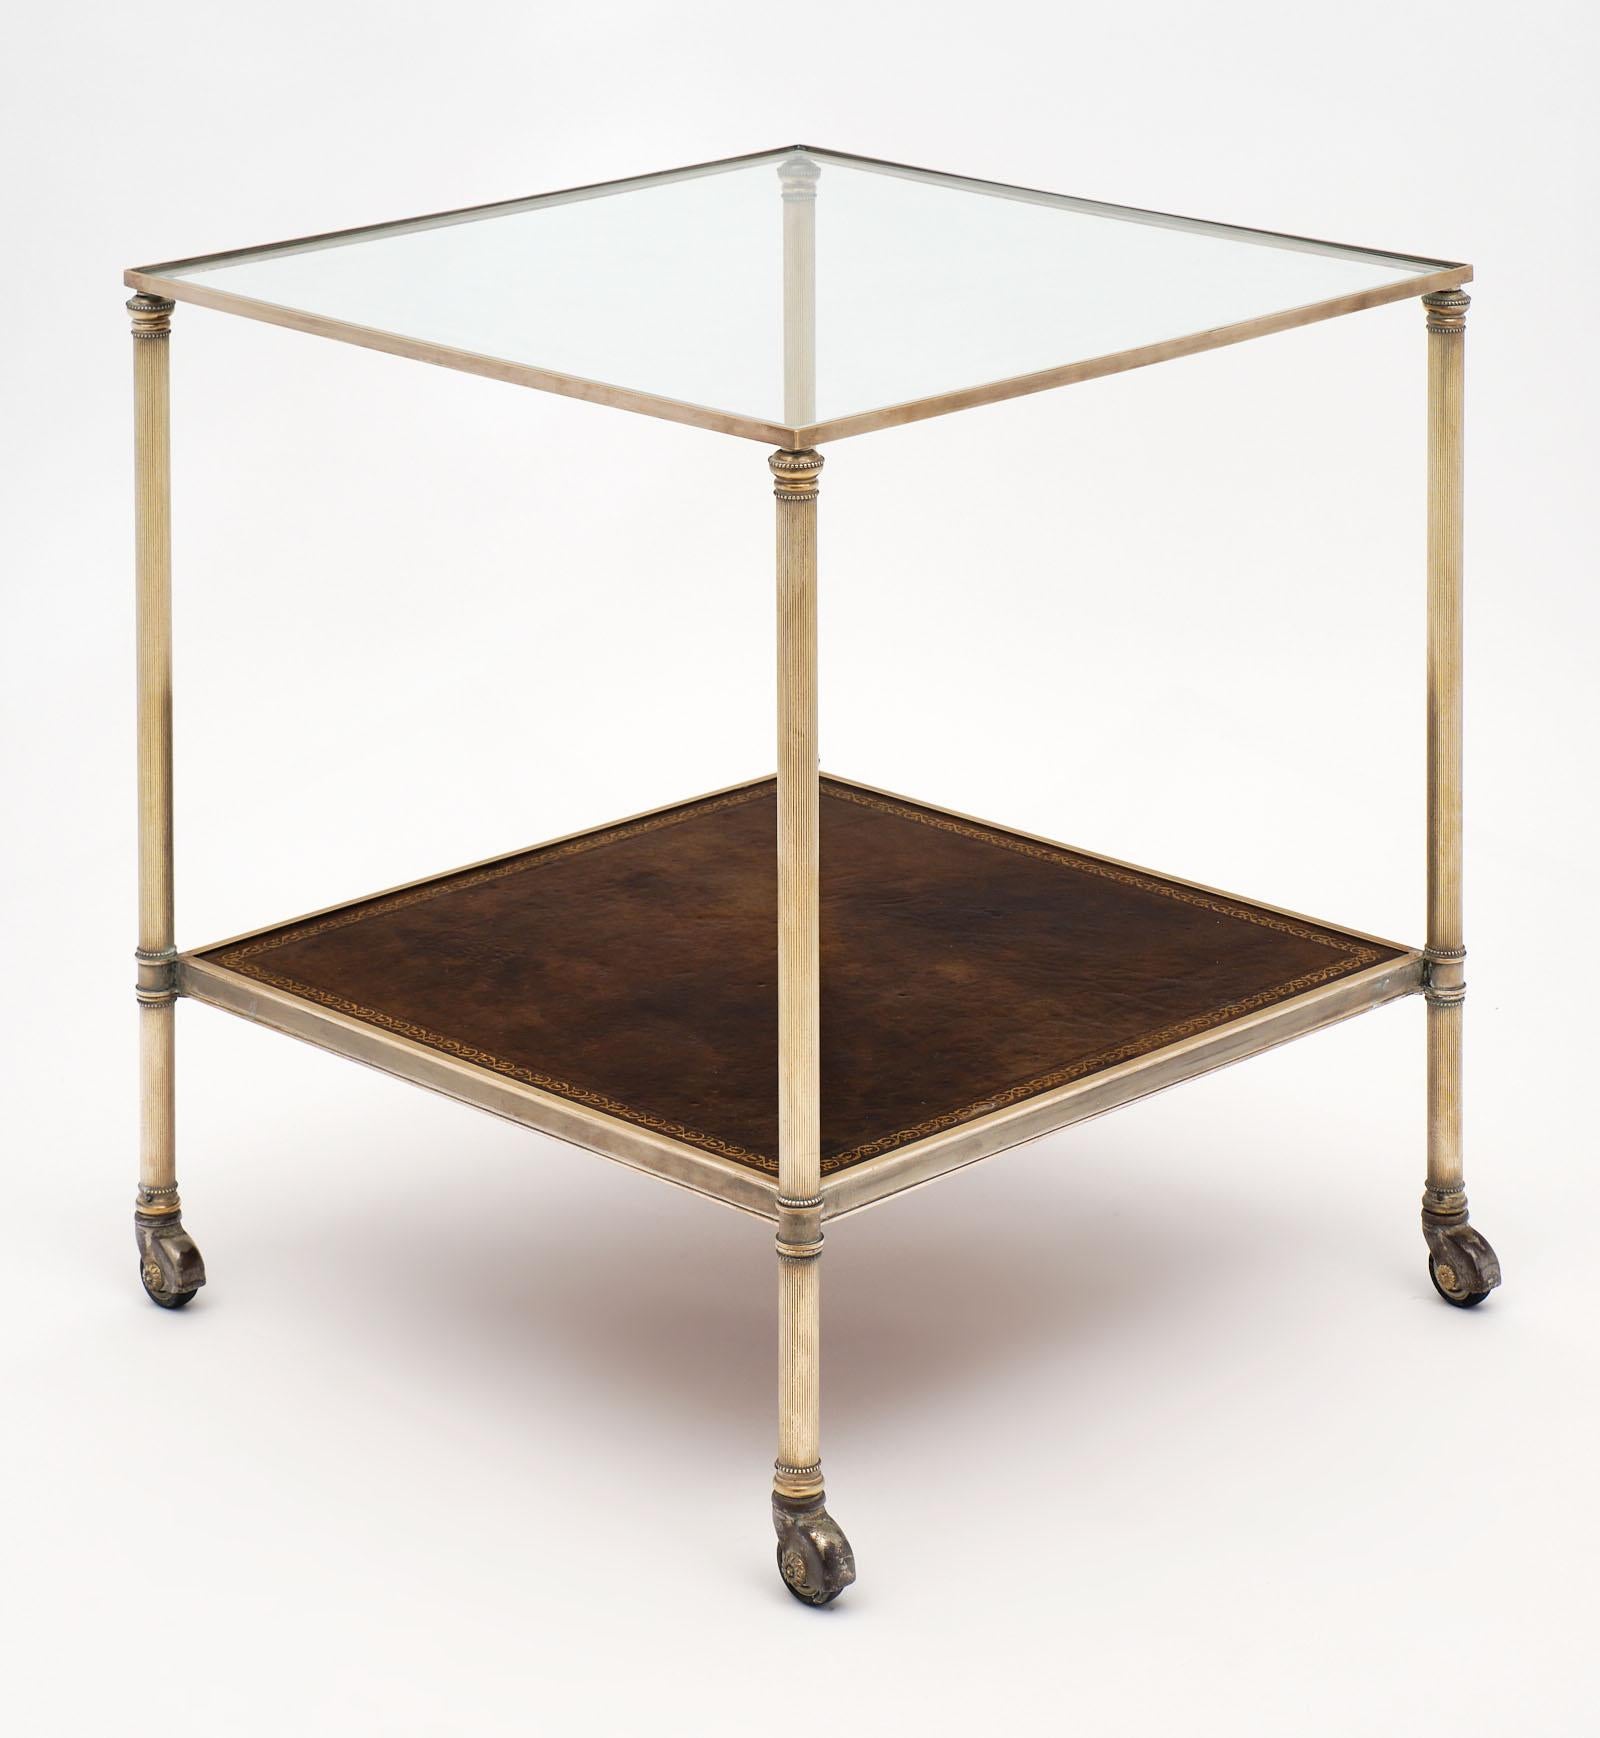 Fine French vintage side table with leather shelf and gilt polished brass structure. This piece is supported by original casters and boasts a clear glass top. The bottom shelf is covered with embossed leather for a handsome touch!